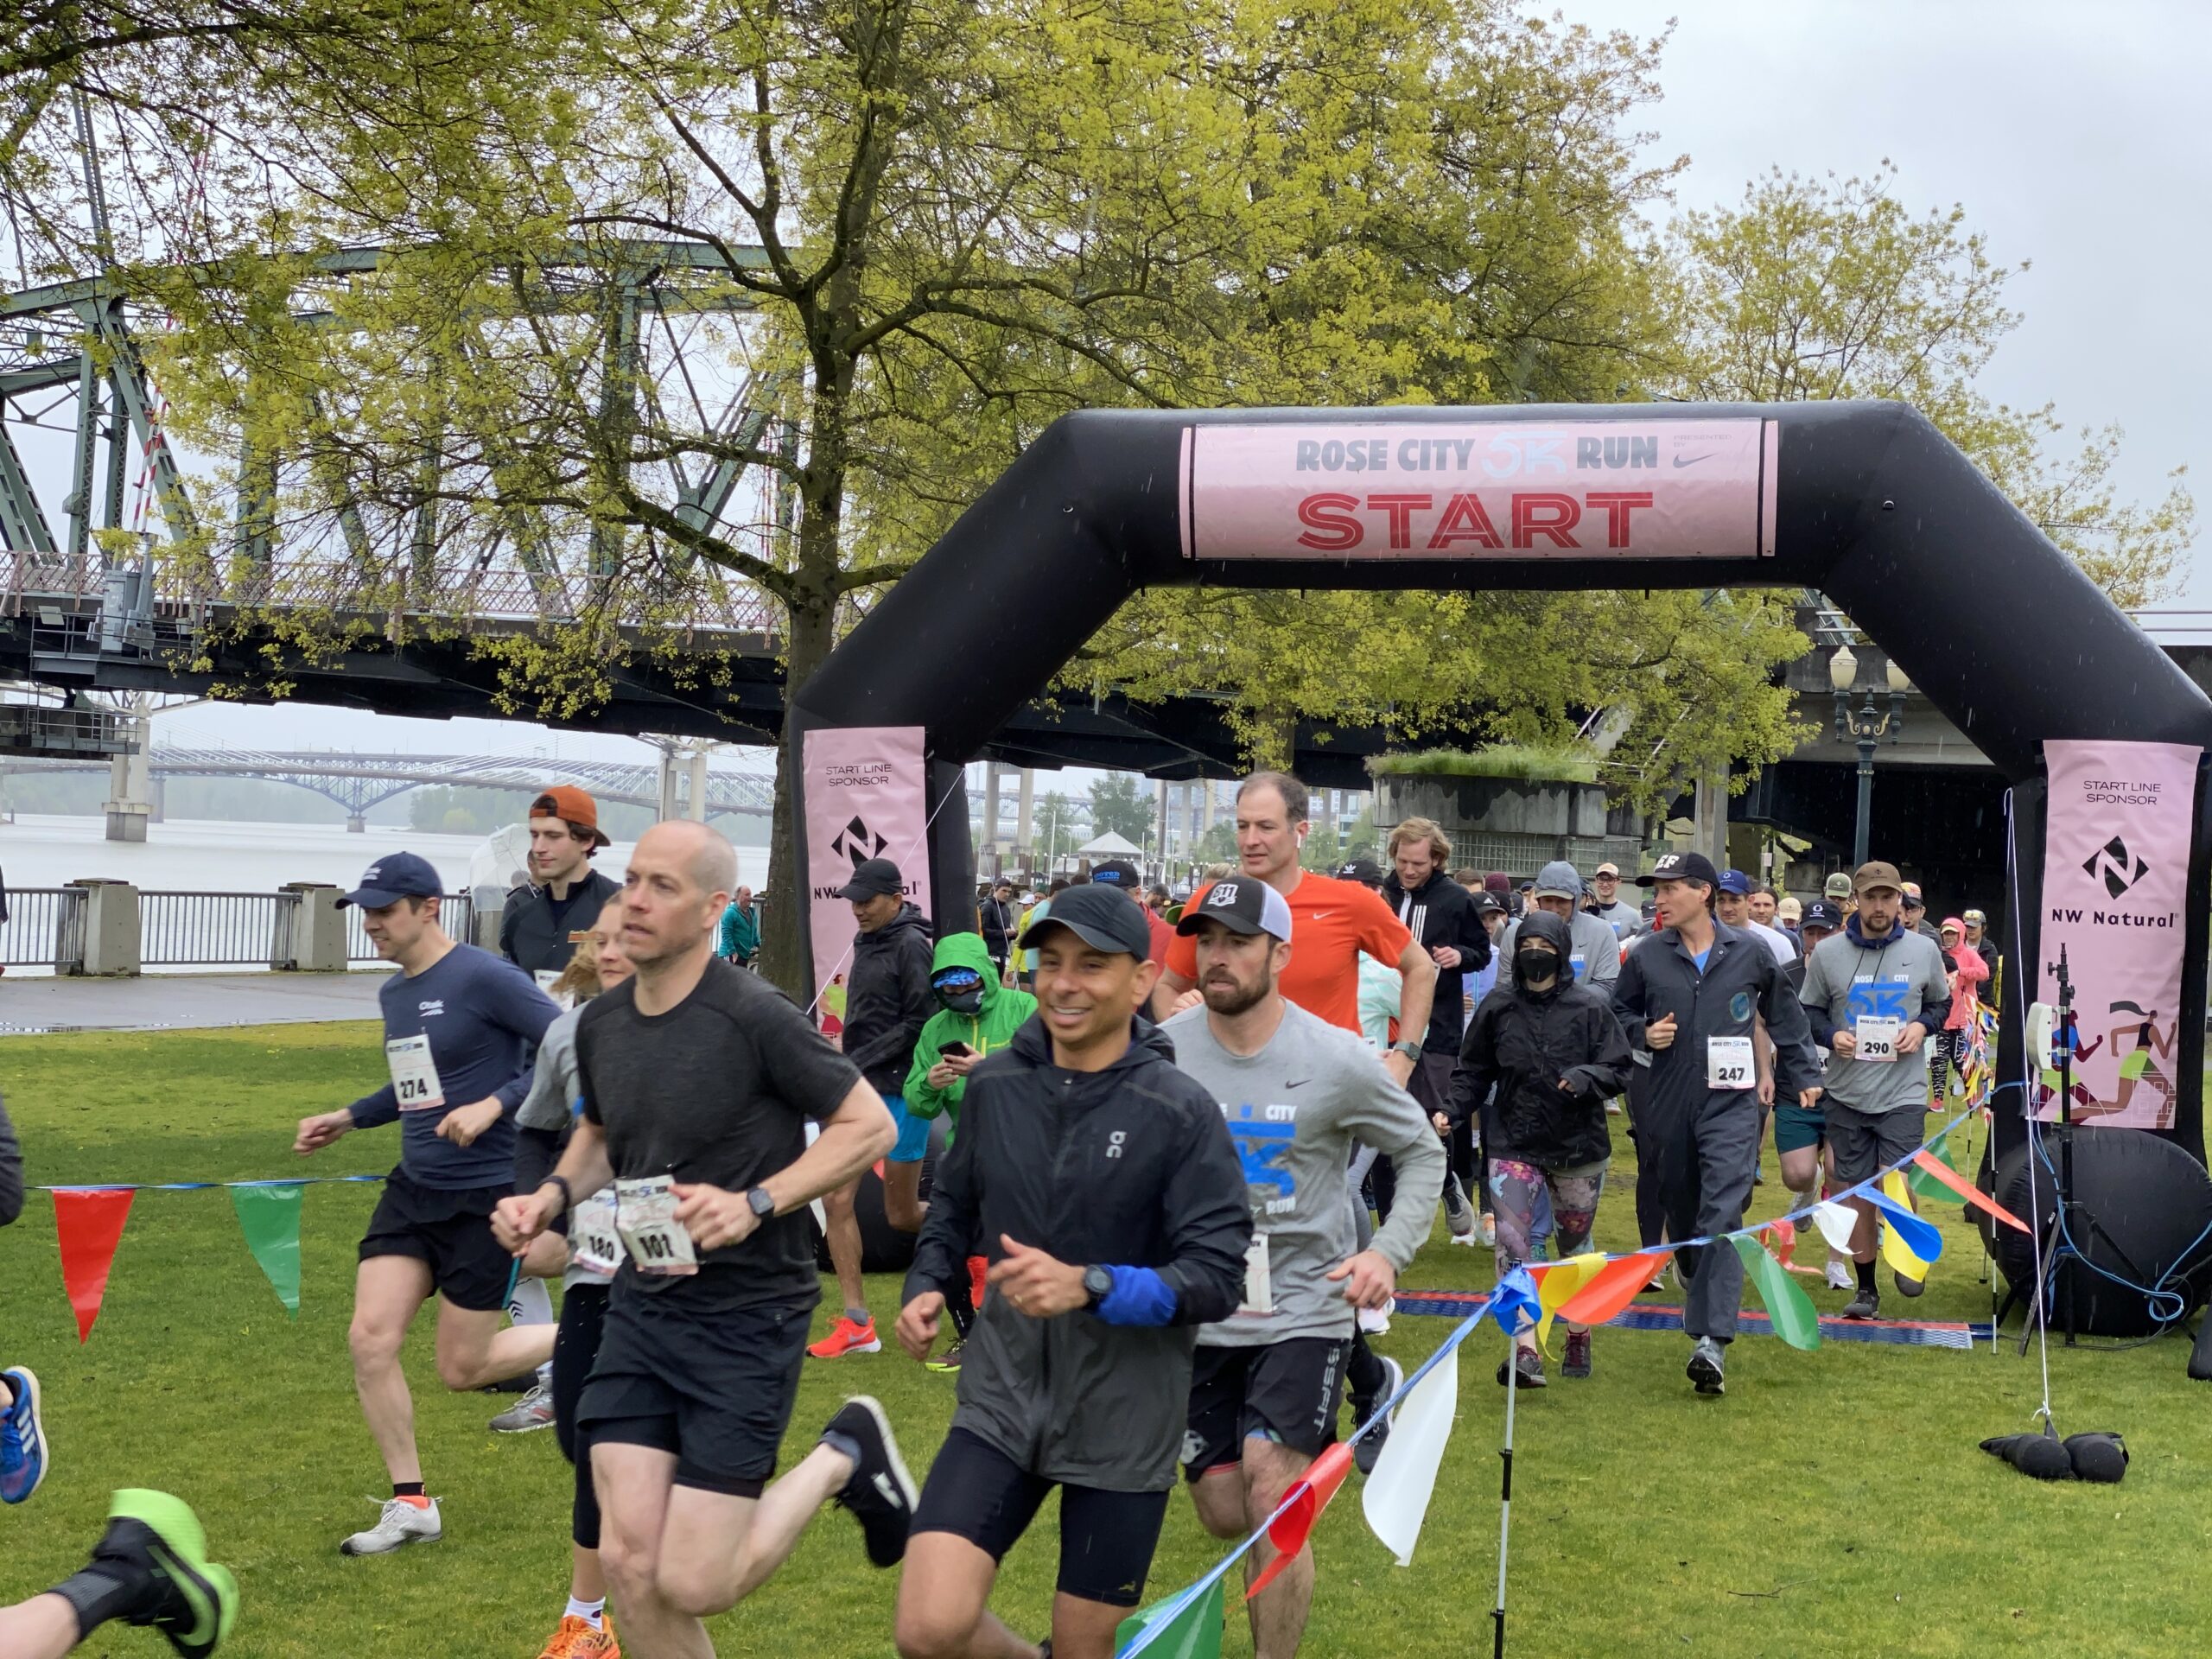 Runners start the race in the 2023 Rose City 5K event